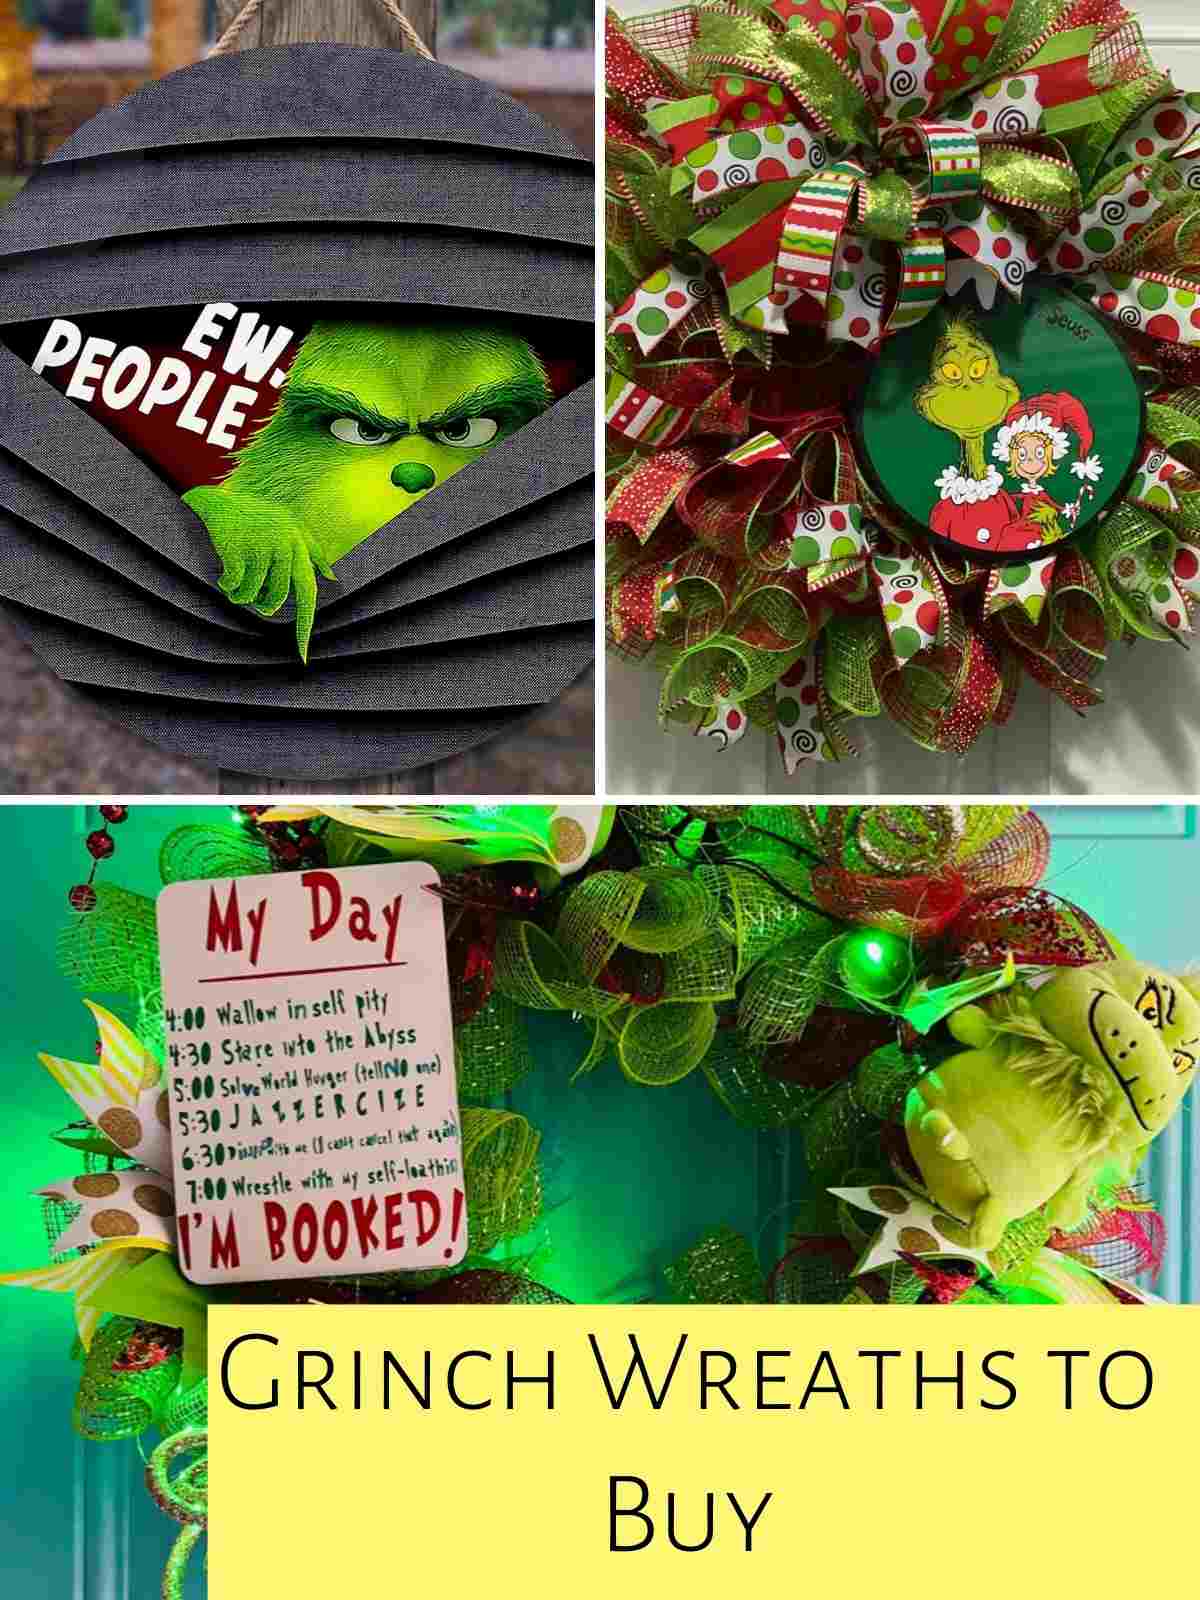 Grinch Wreaths to Buy